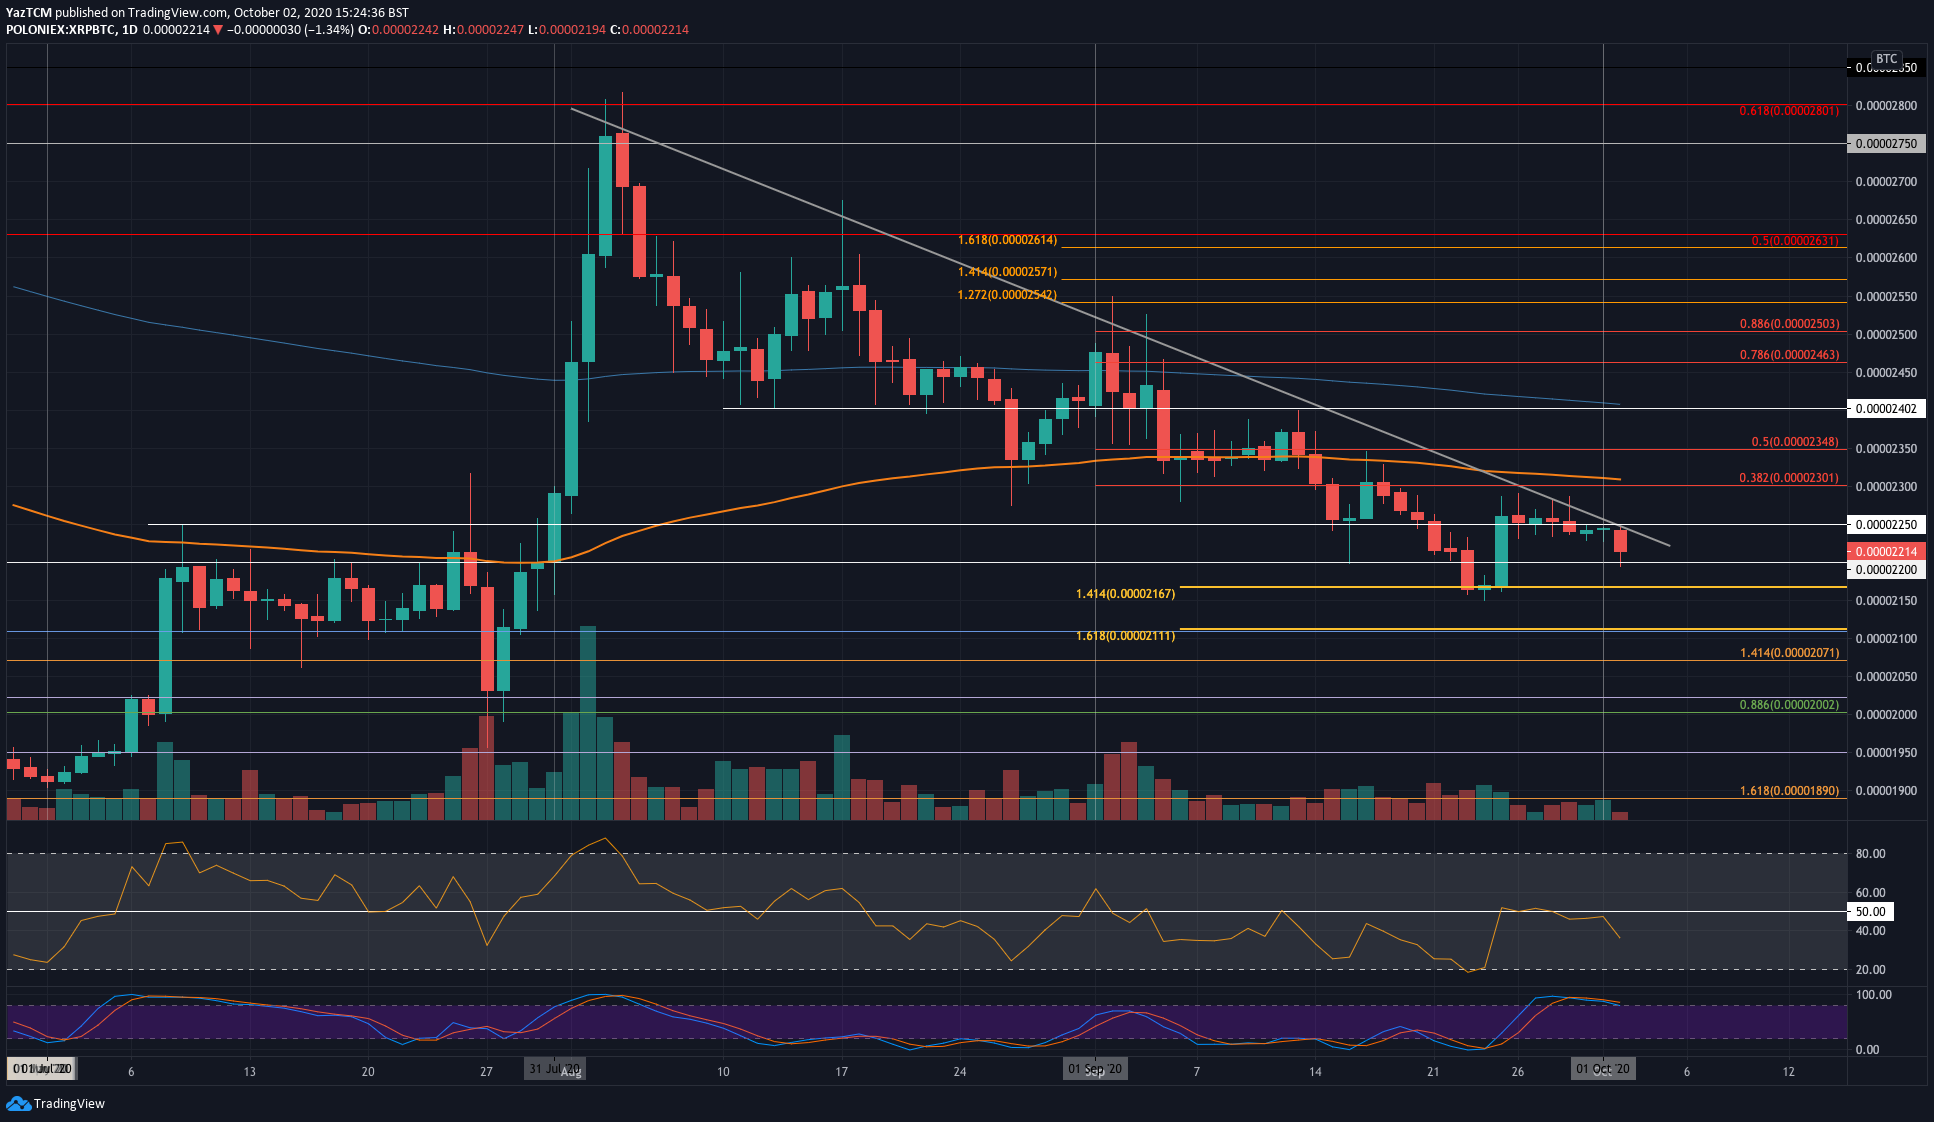 Crypto Price Analysis & Overview October 2nd: Bitcoin, Ethereum, Ripple, Binance Coin, and Polkadot